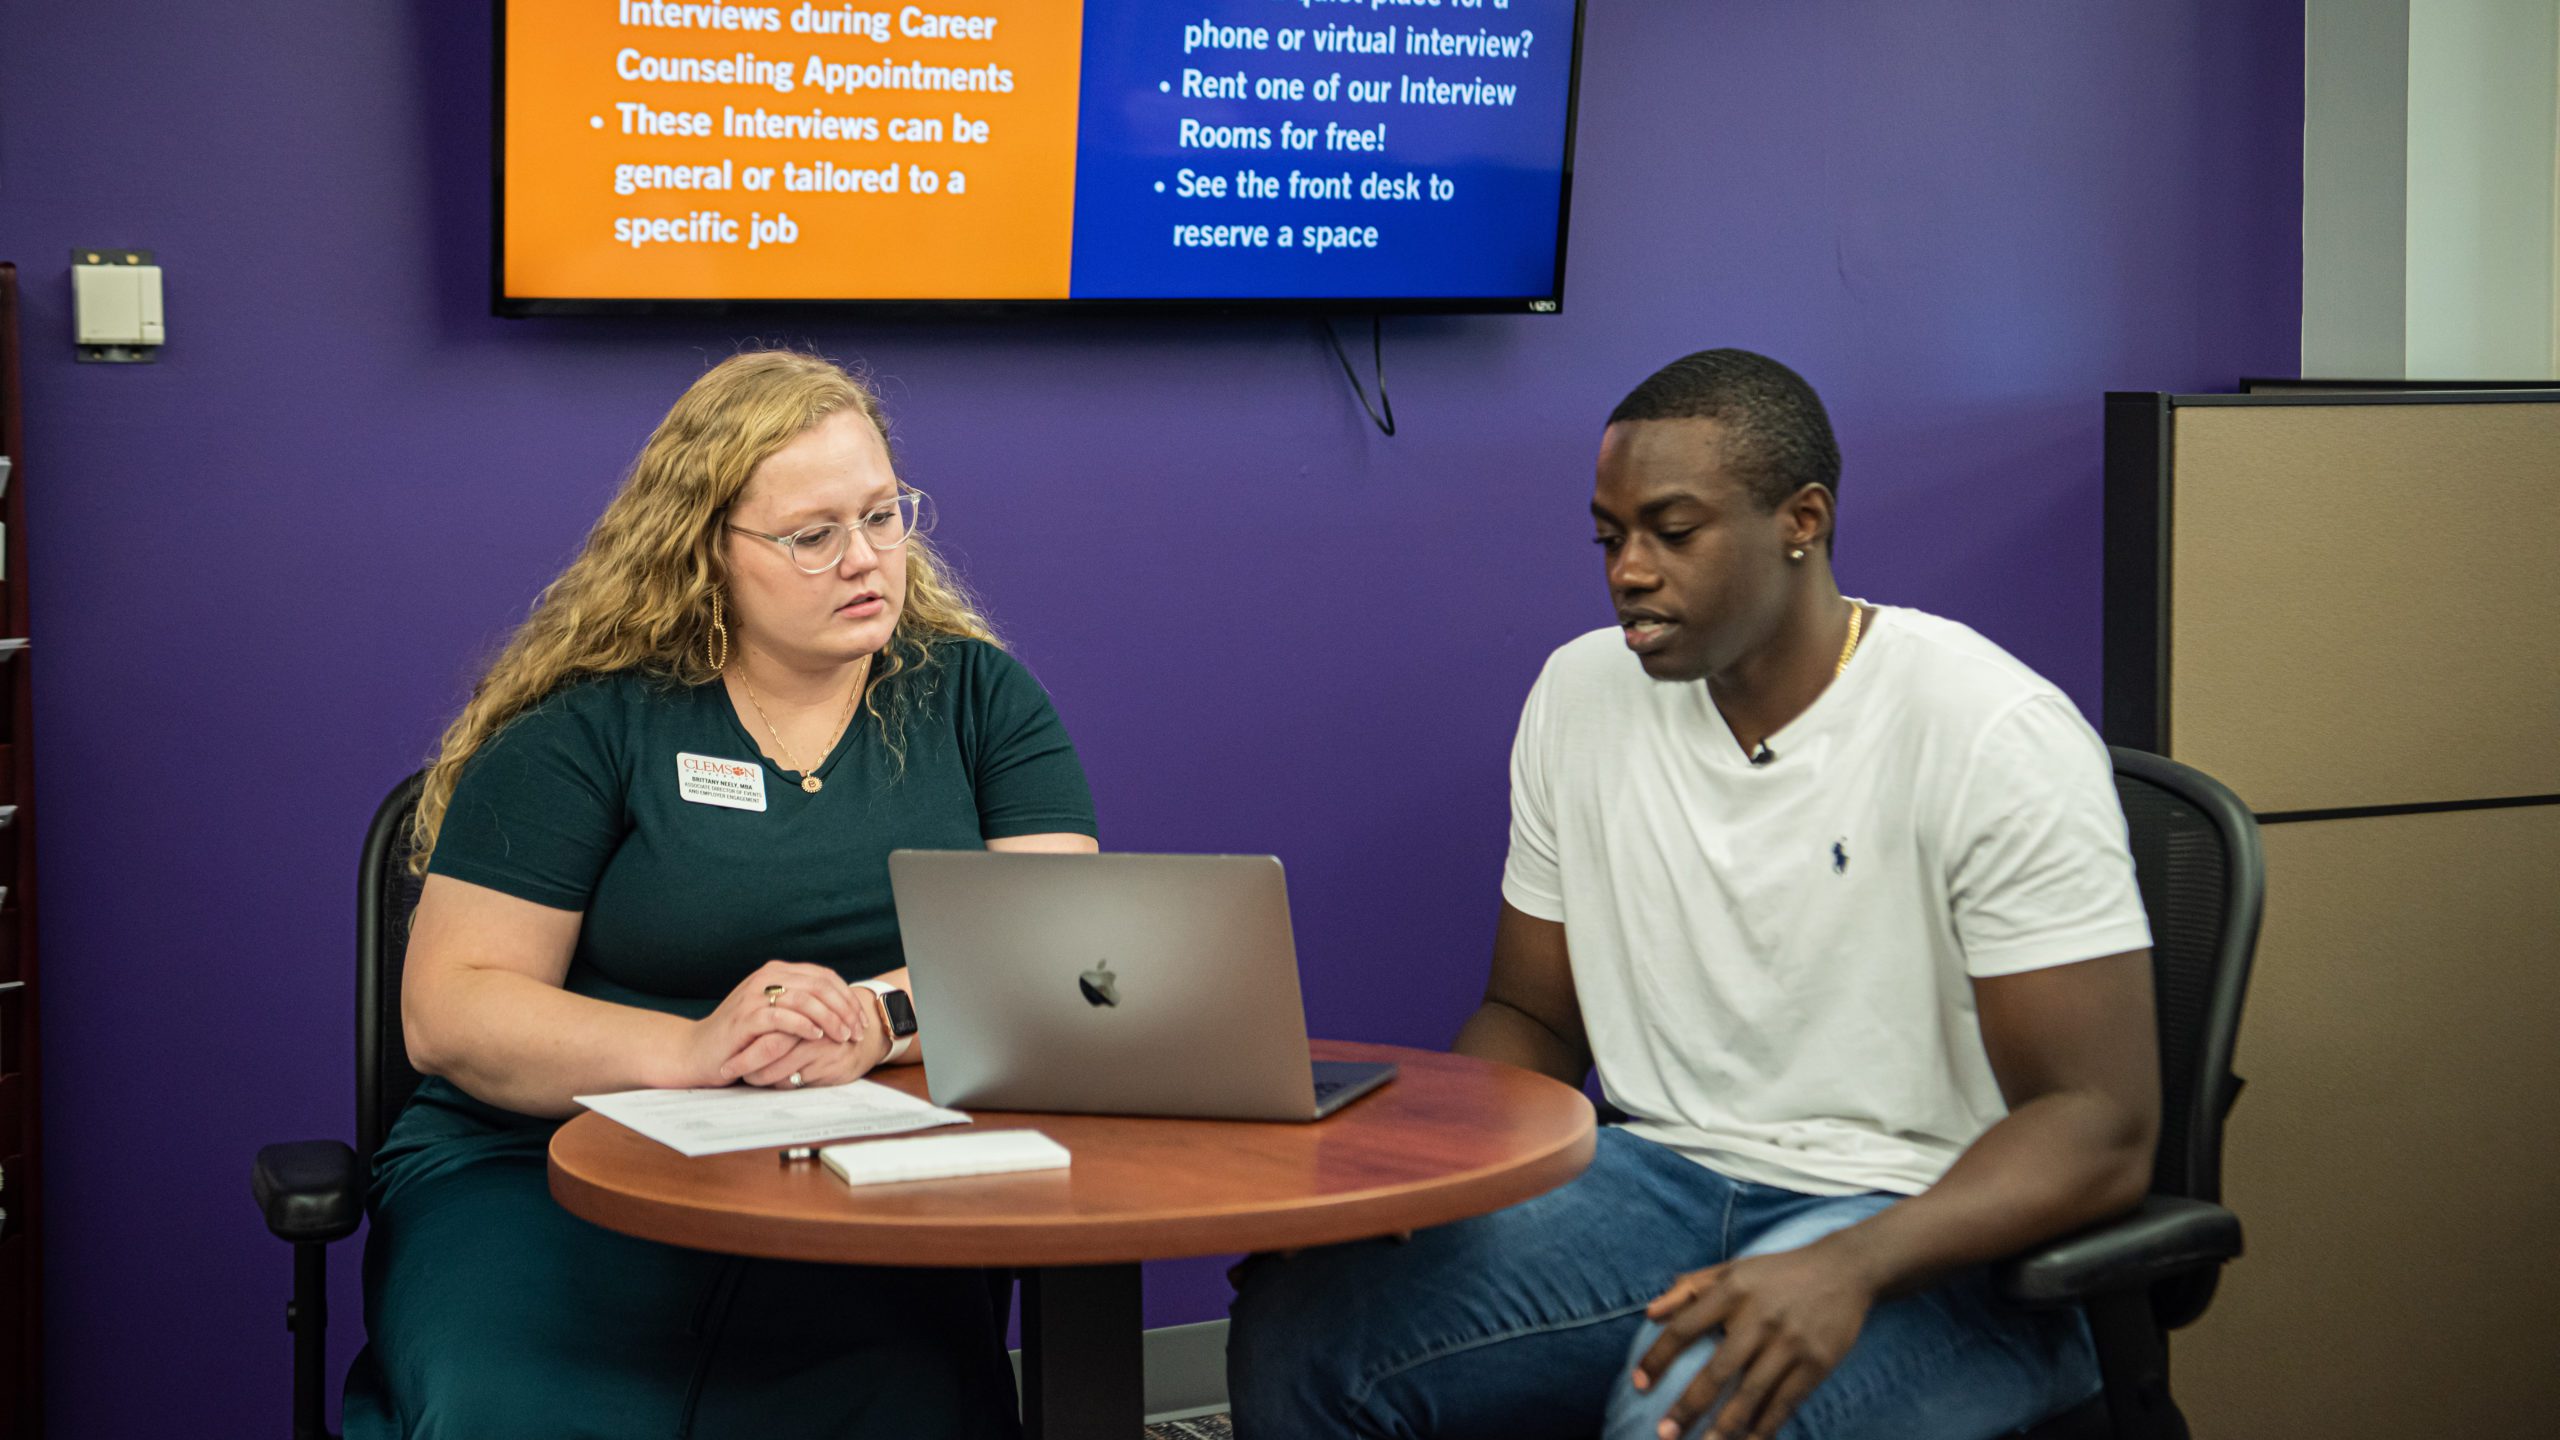 Brittany Neely advises a student during a career counseling session